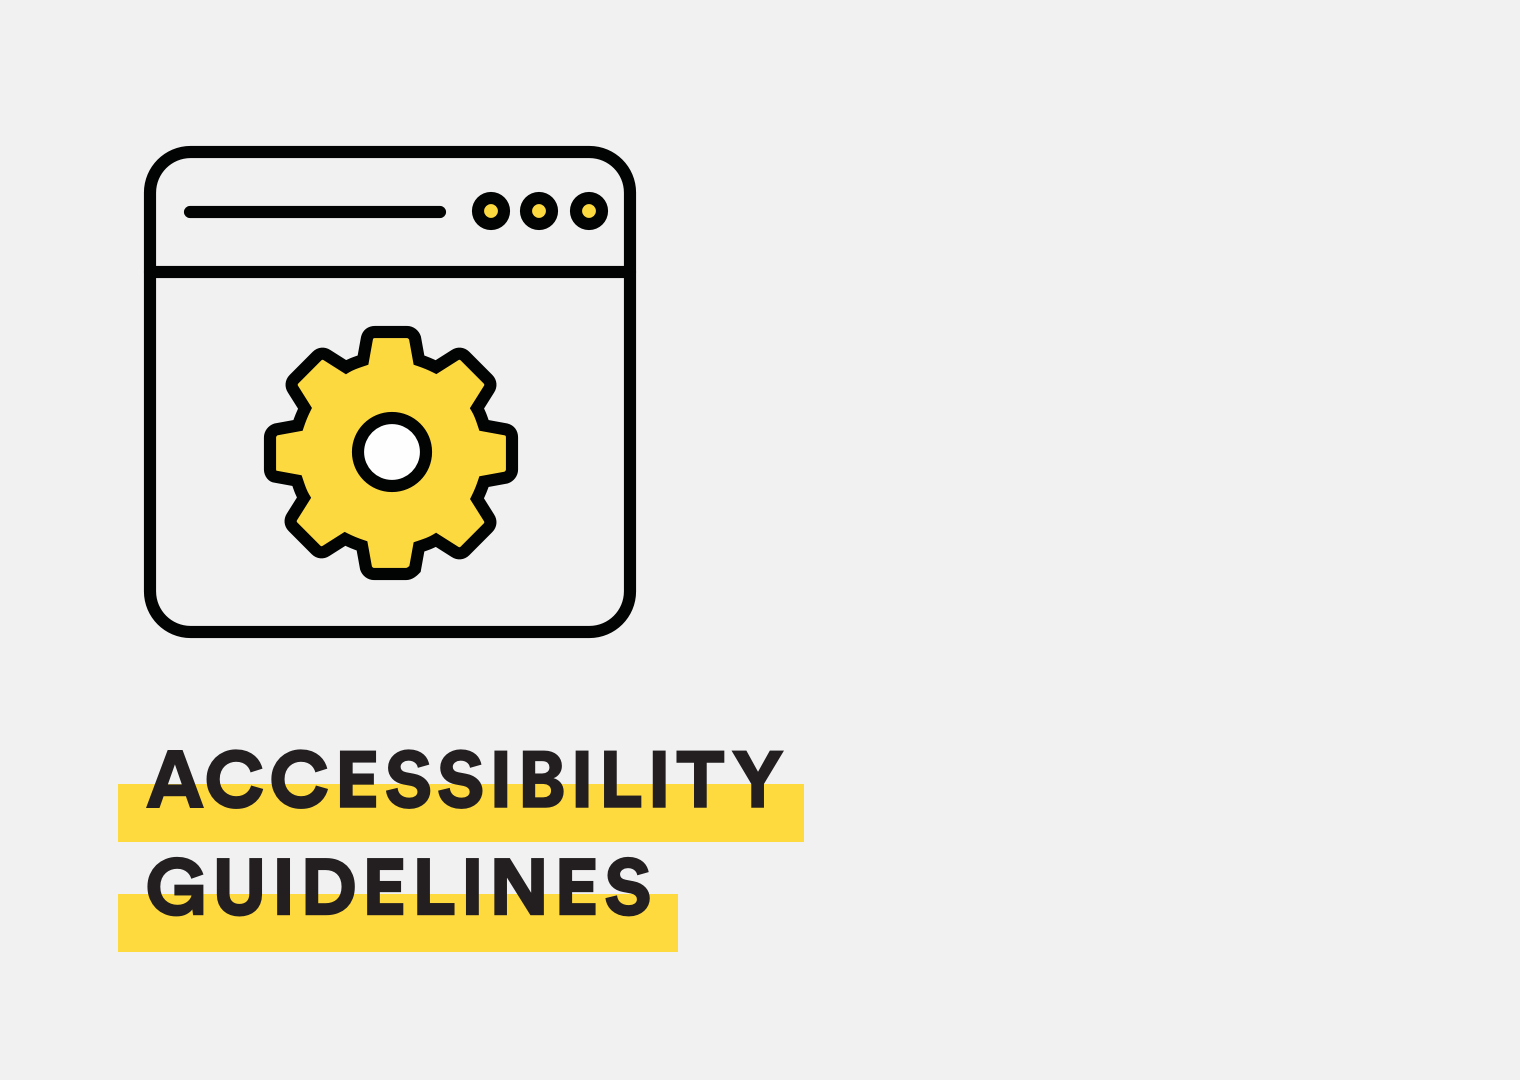 Image about Website Accessibility NYC